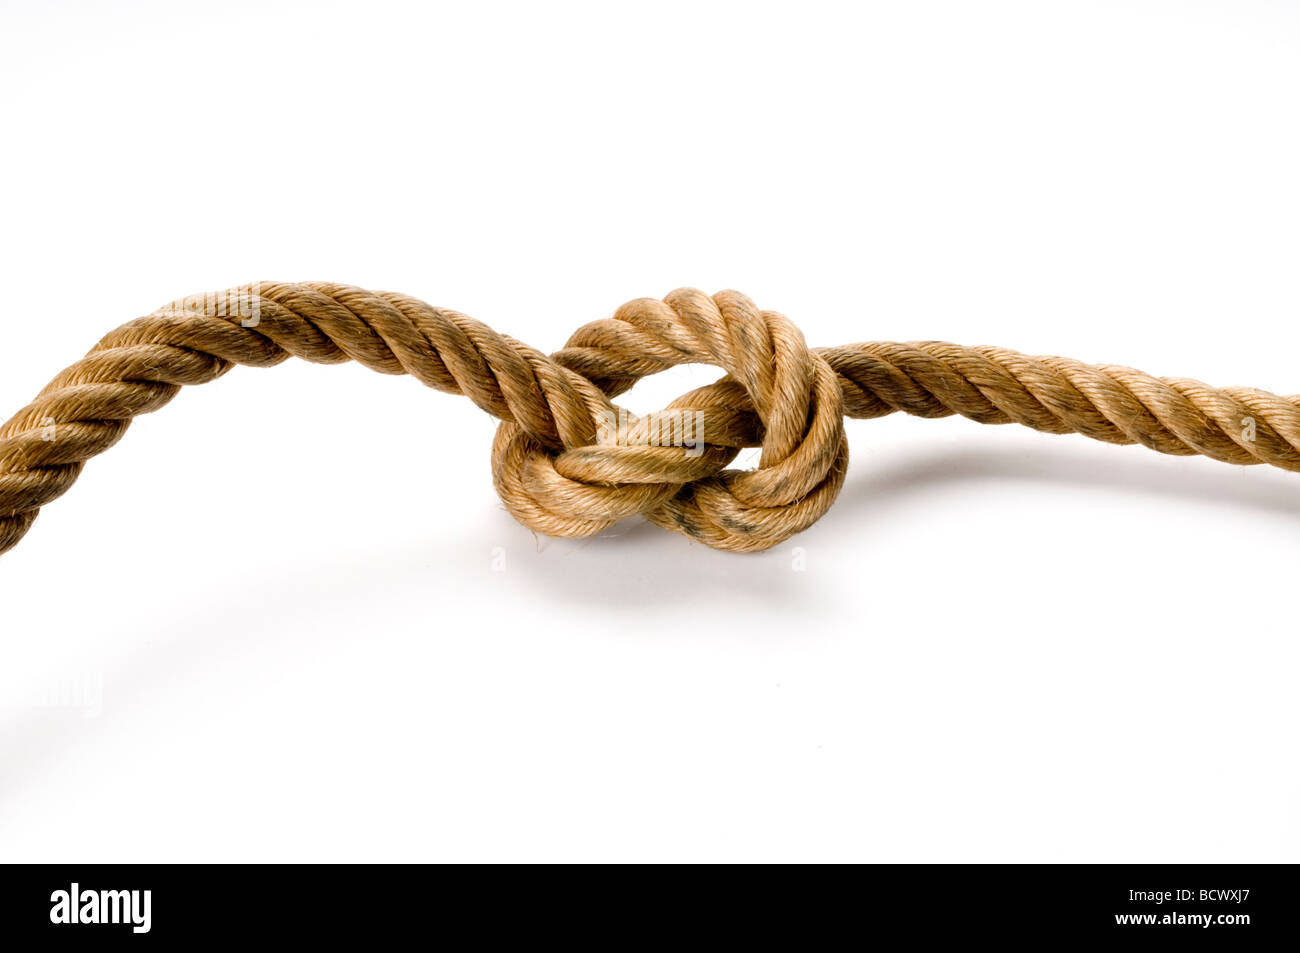 Rope knot on white Banque D'Images